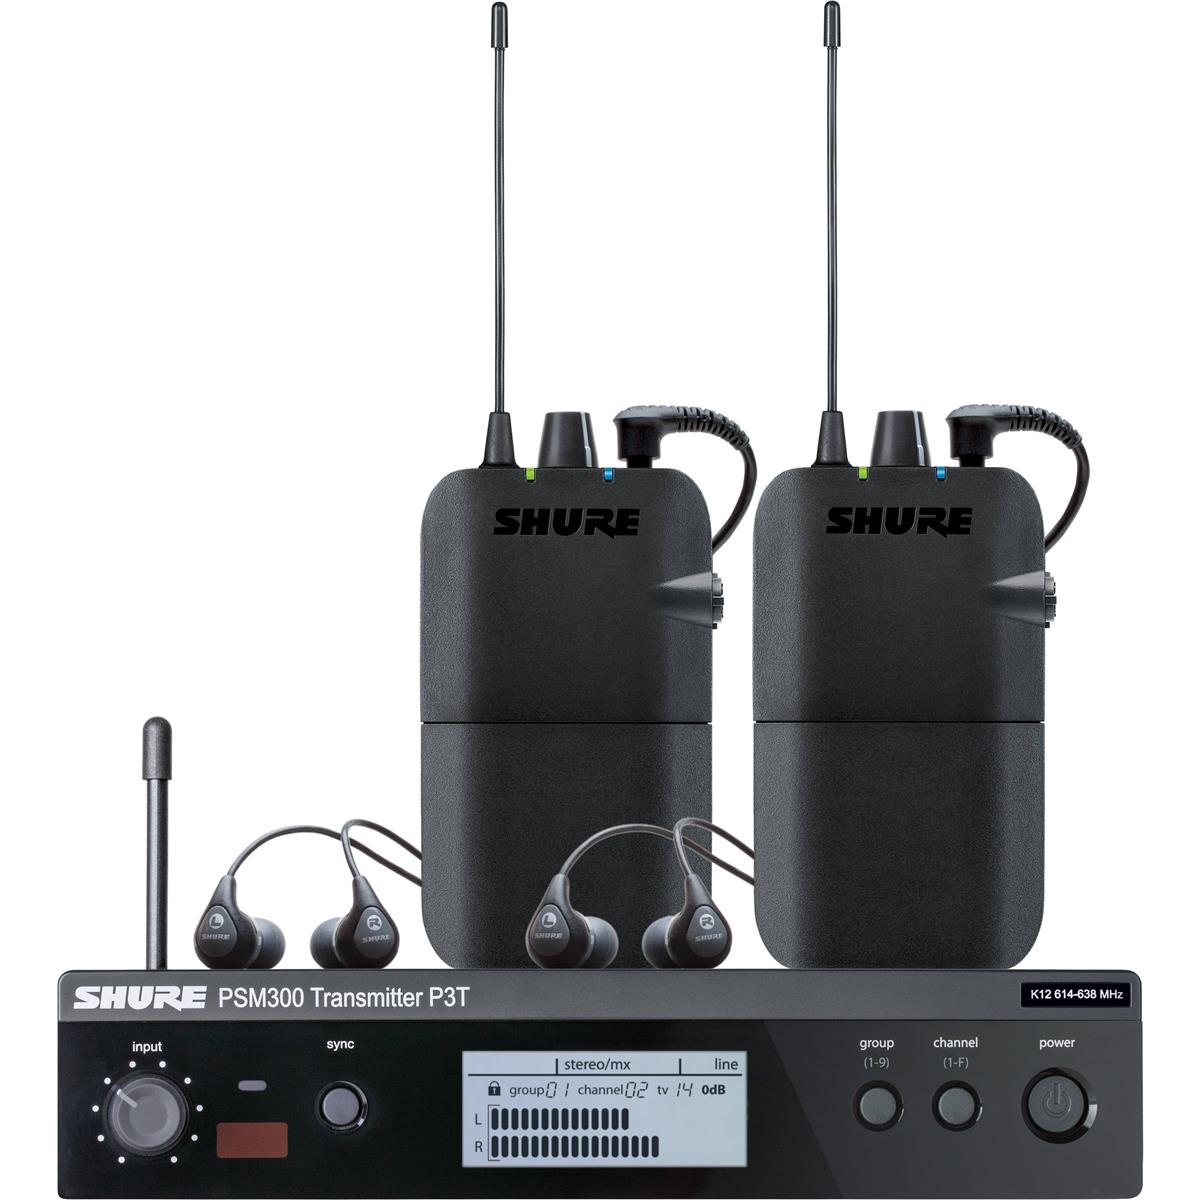 Shure PSM 300 Twin Pack Wireless In-Ear Monitor Kit, G20: 488 - 512MHz, Black -  P3TR112TW-G20